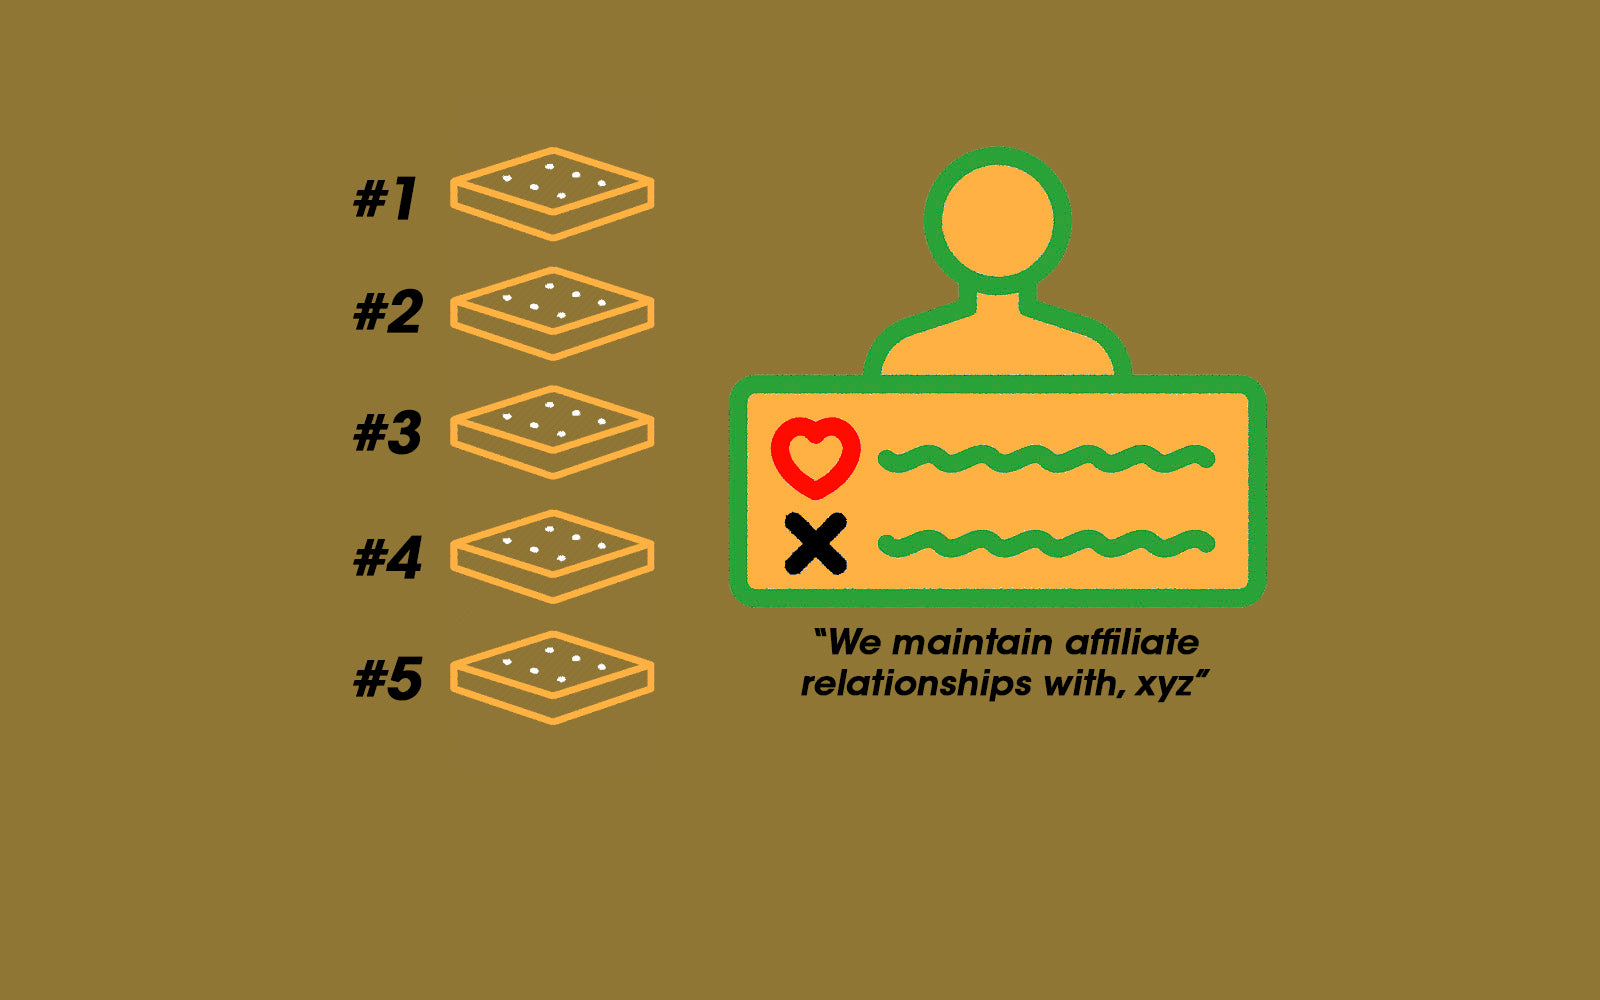 Image illustrates the way various mattress review websites rank mattresses.  Most times this just confuses customers and most times its motivated by how much the manufacture will pay the reviewing website for the rank